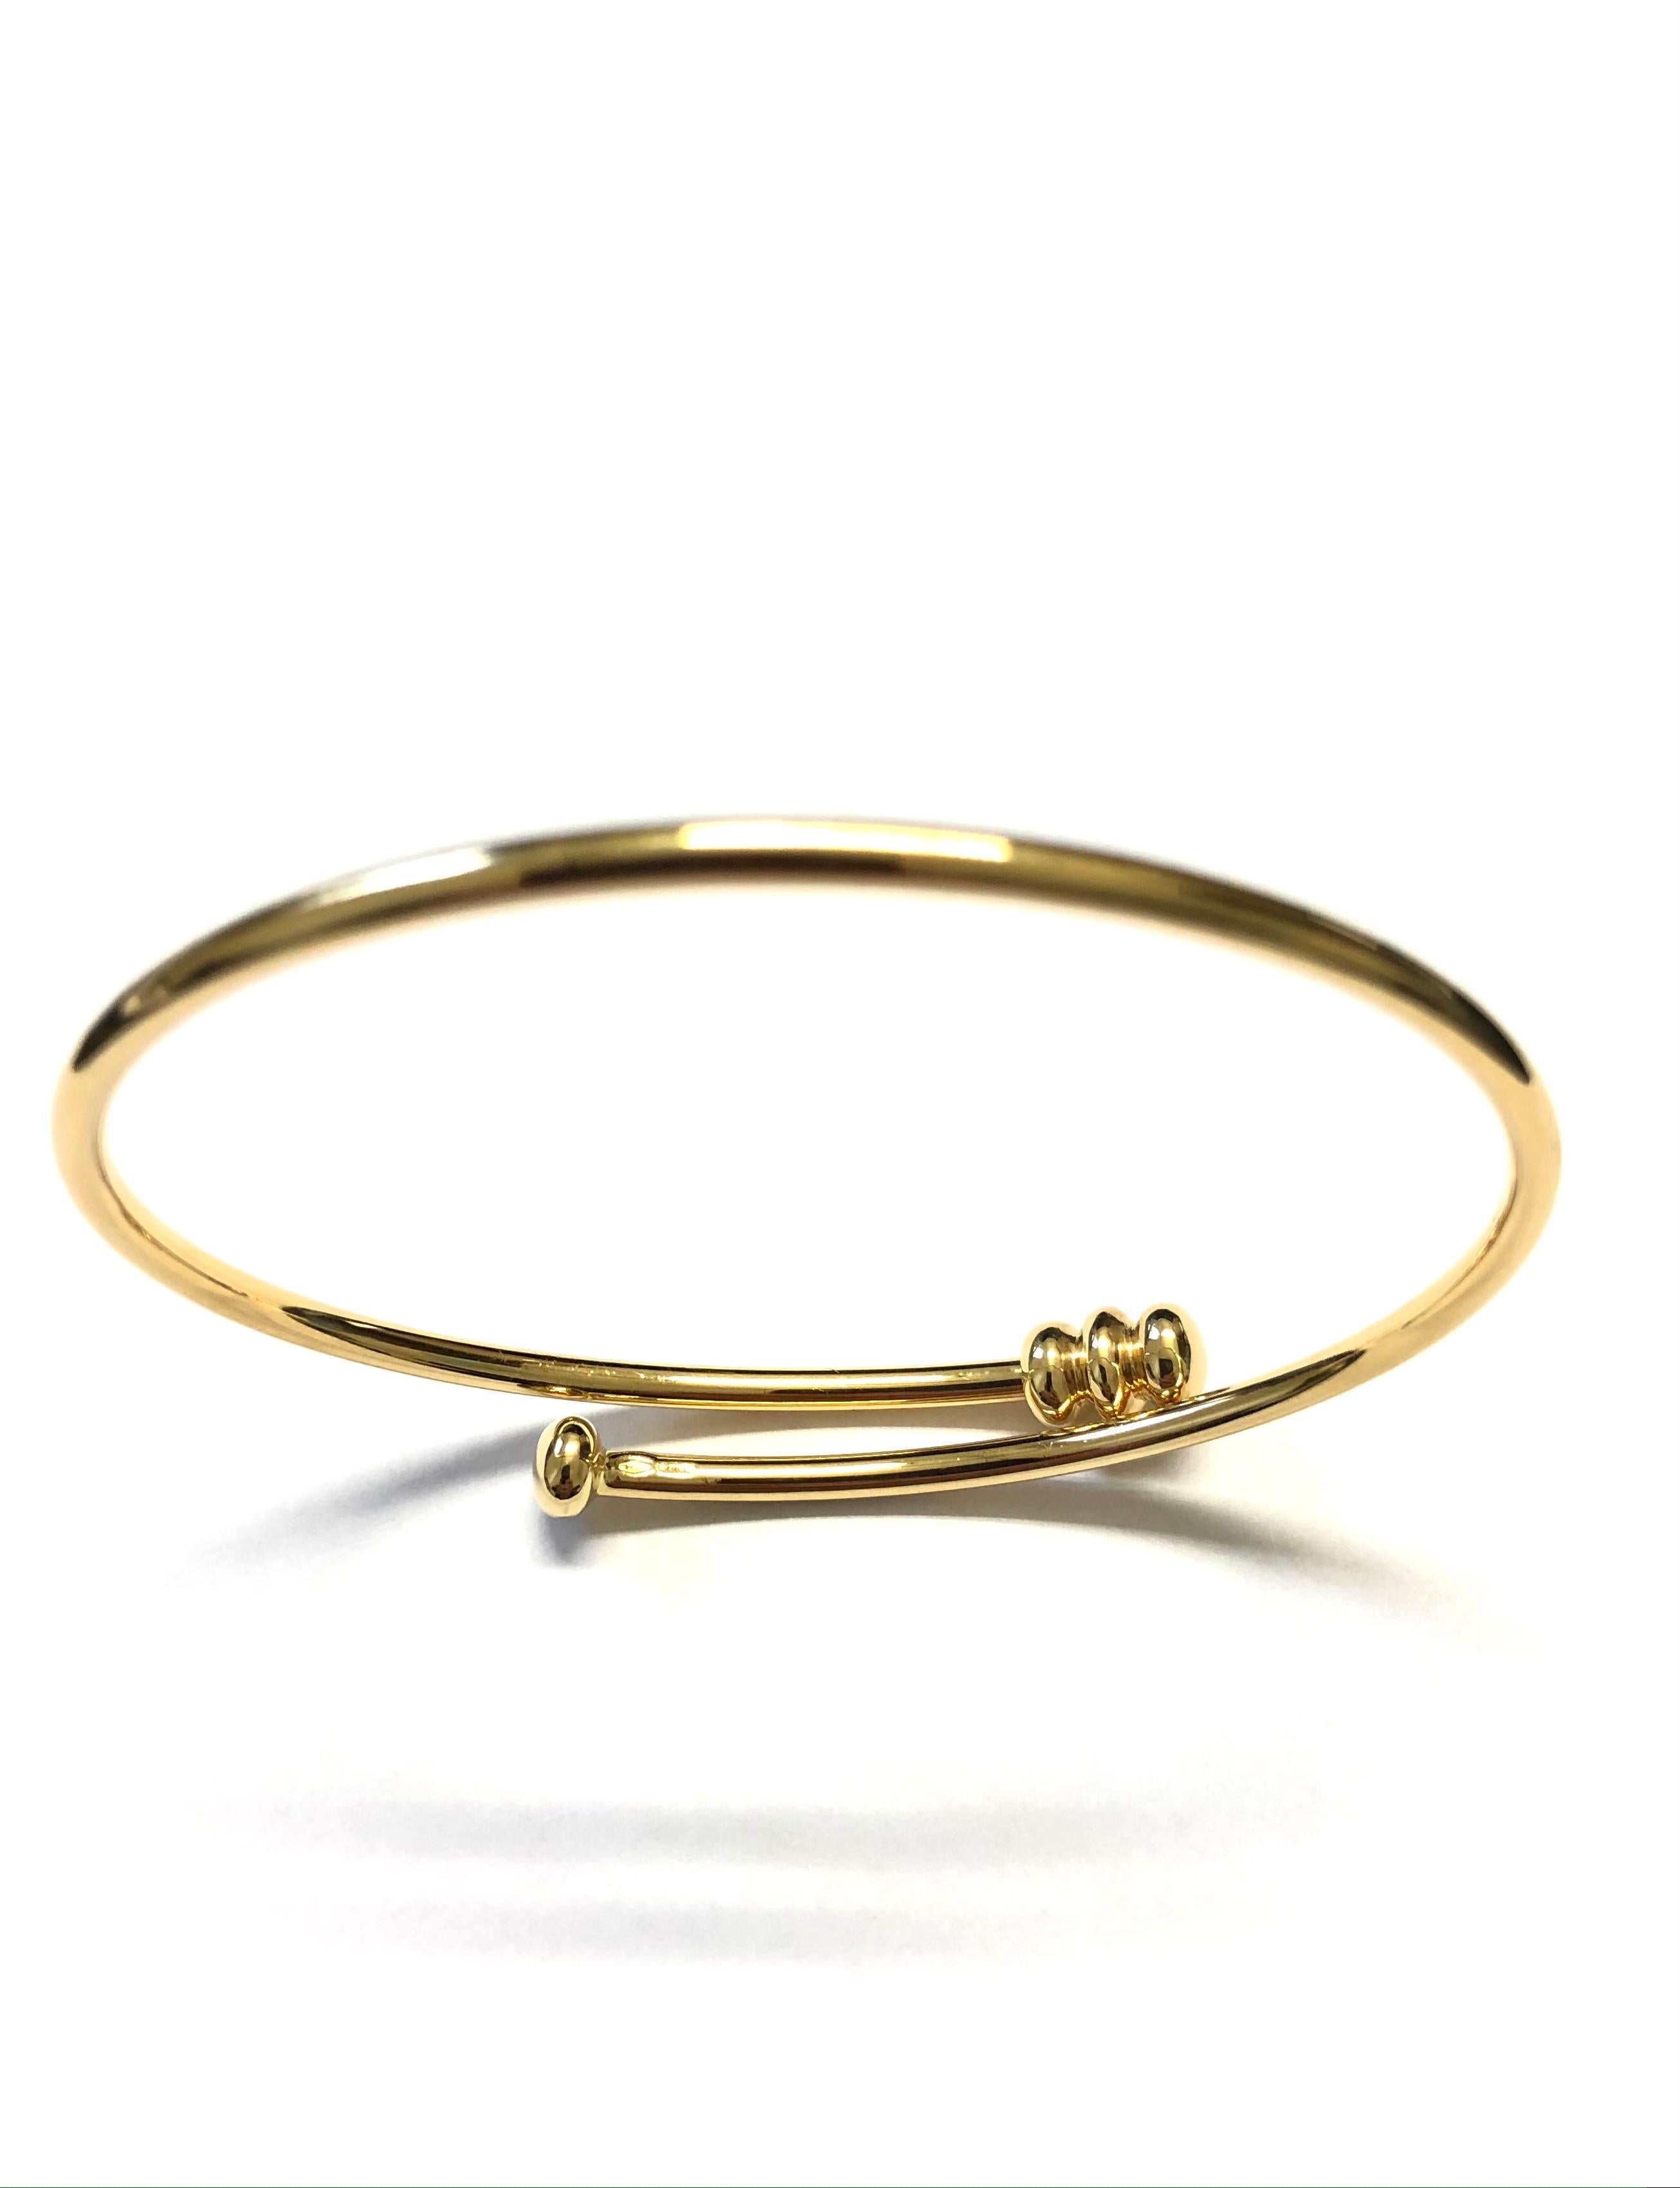 Contemporary 18 Carat Yellow Gold Bangle Bracelet For Sale